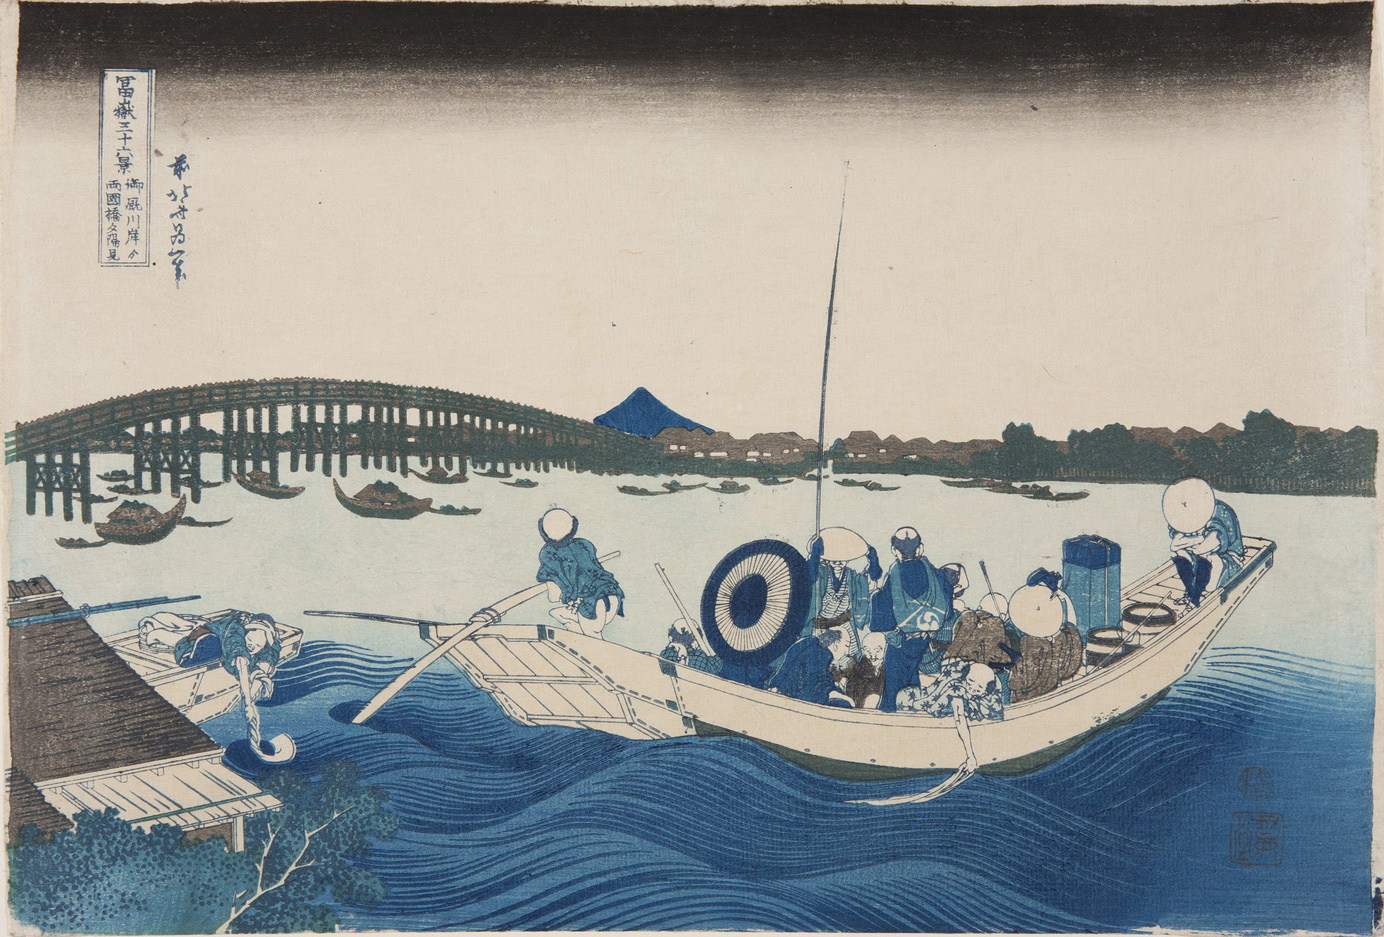 Japanese print of a river scene. In the foreground there are waves and a boat full of passengers, the boatman steers with a pole. Many boats are on the water and a bridge spans the river. The far bank has buildings and trees and Mount Fuji is in the distance.